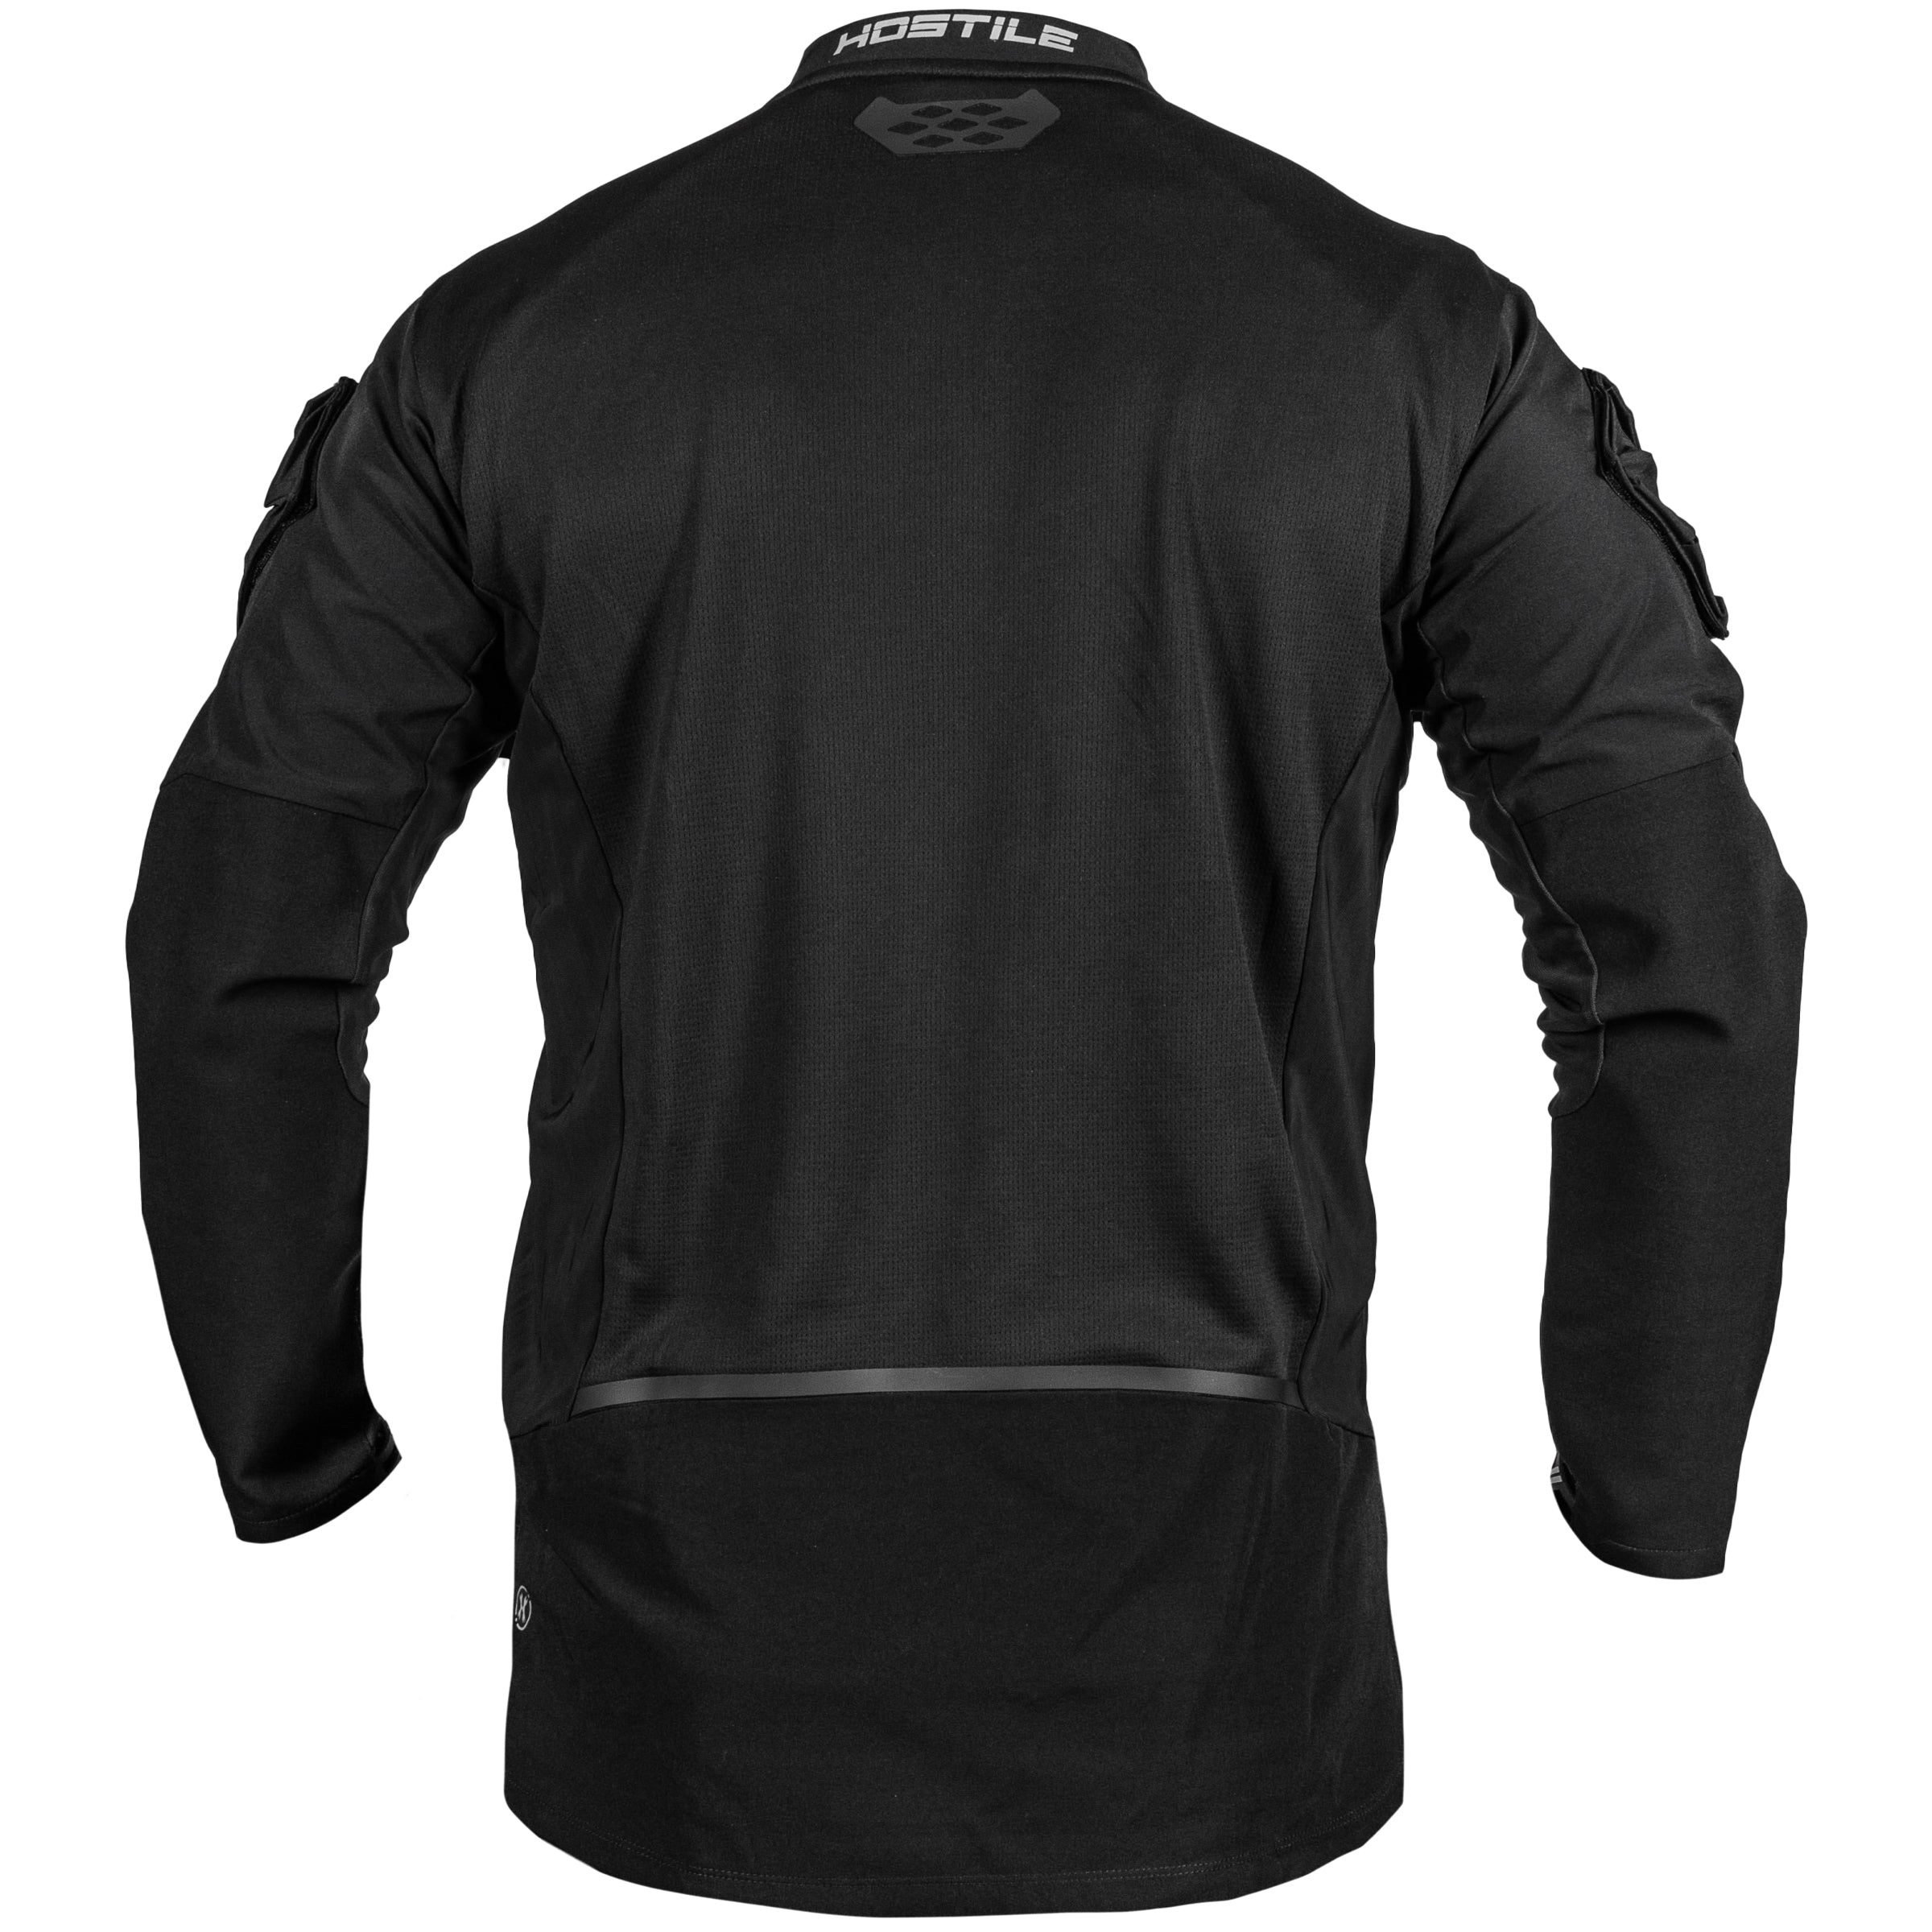 RECON JERSEY - STEALTH - Eminent Paintball And Airsoft